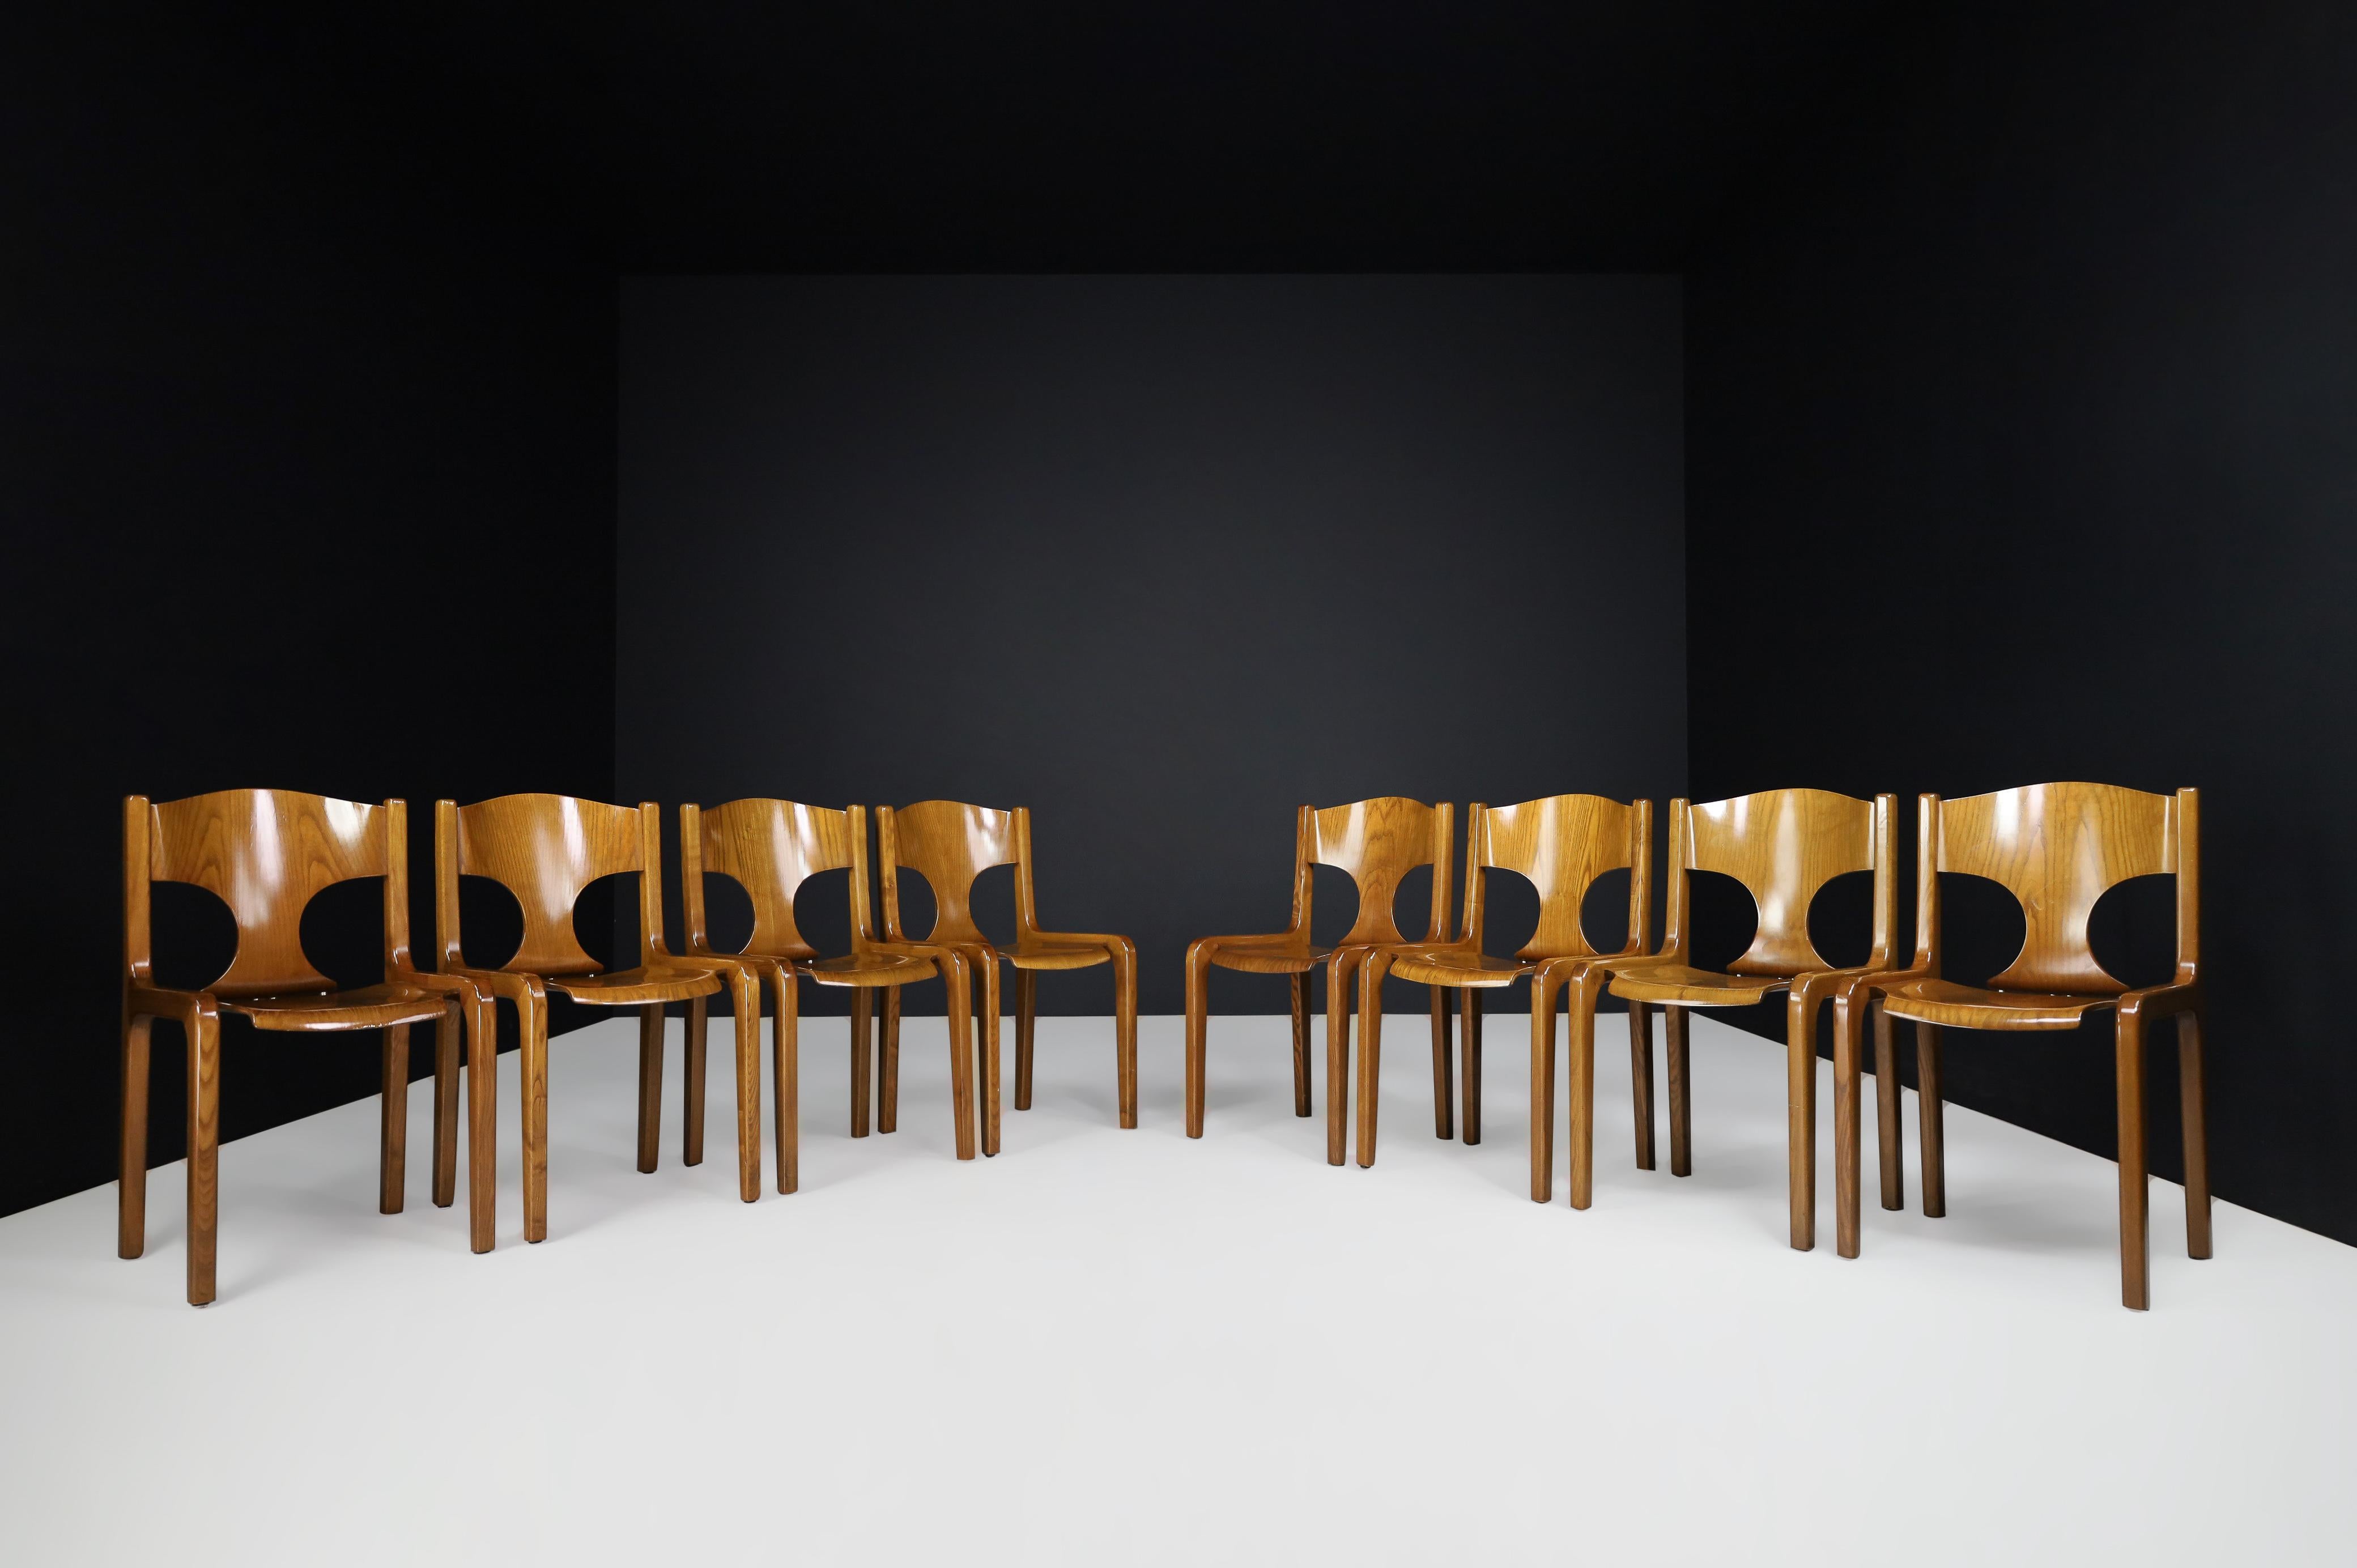 Augusto Savini for Pozzi dining room chairs, Italy 1968.

A gorgeous set of high-quality dining room chairs designed by architect Augusto Savini for the manufactory Pozzi at the end of the 1960s was first presented at Pozzi's Gallerie Lafayette in